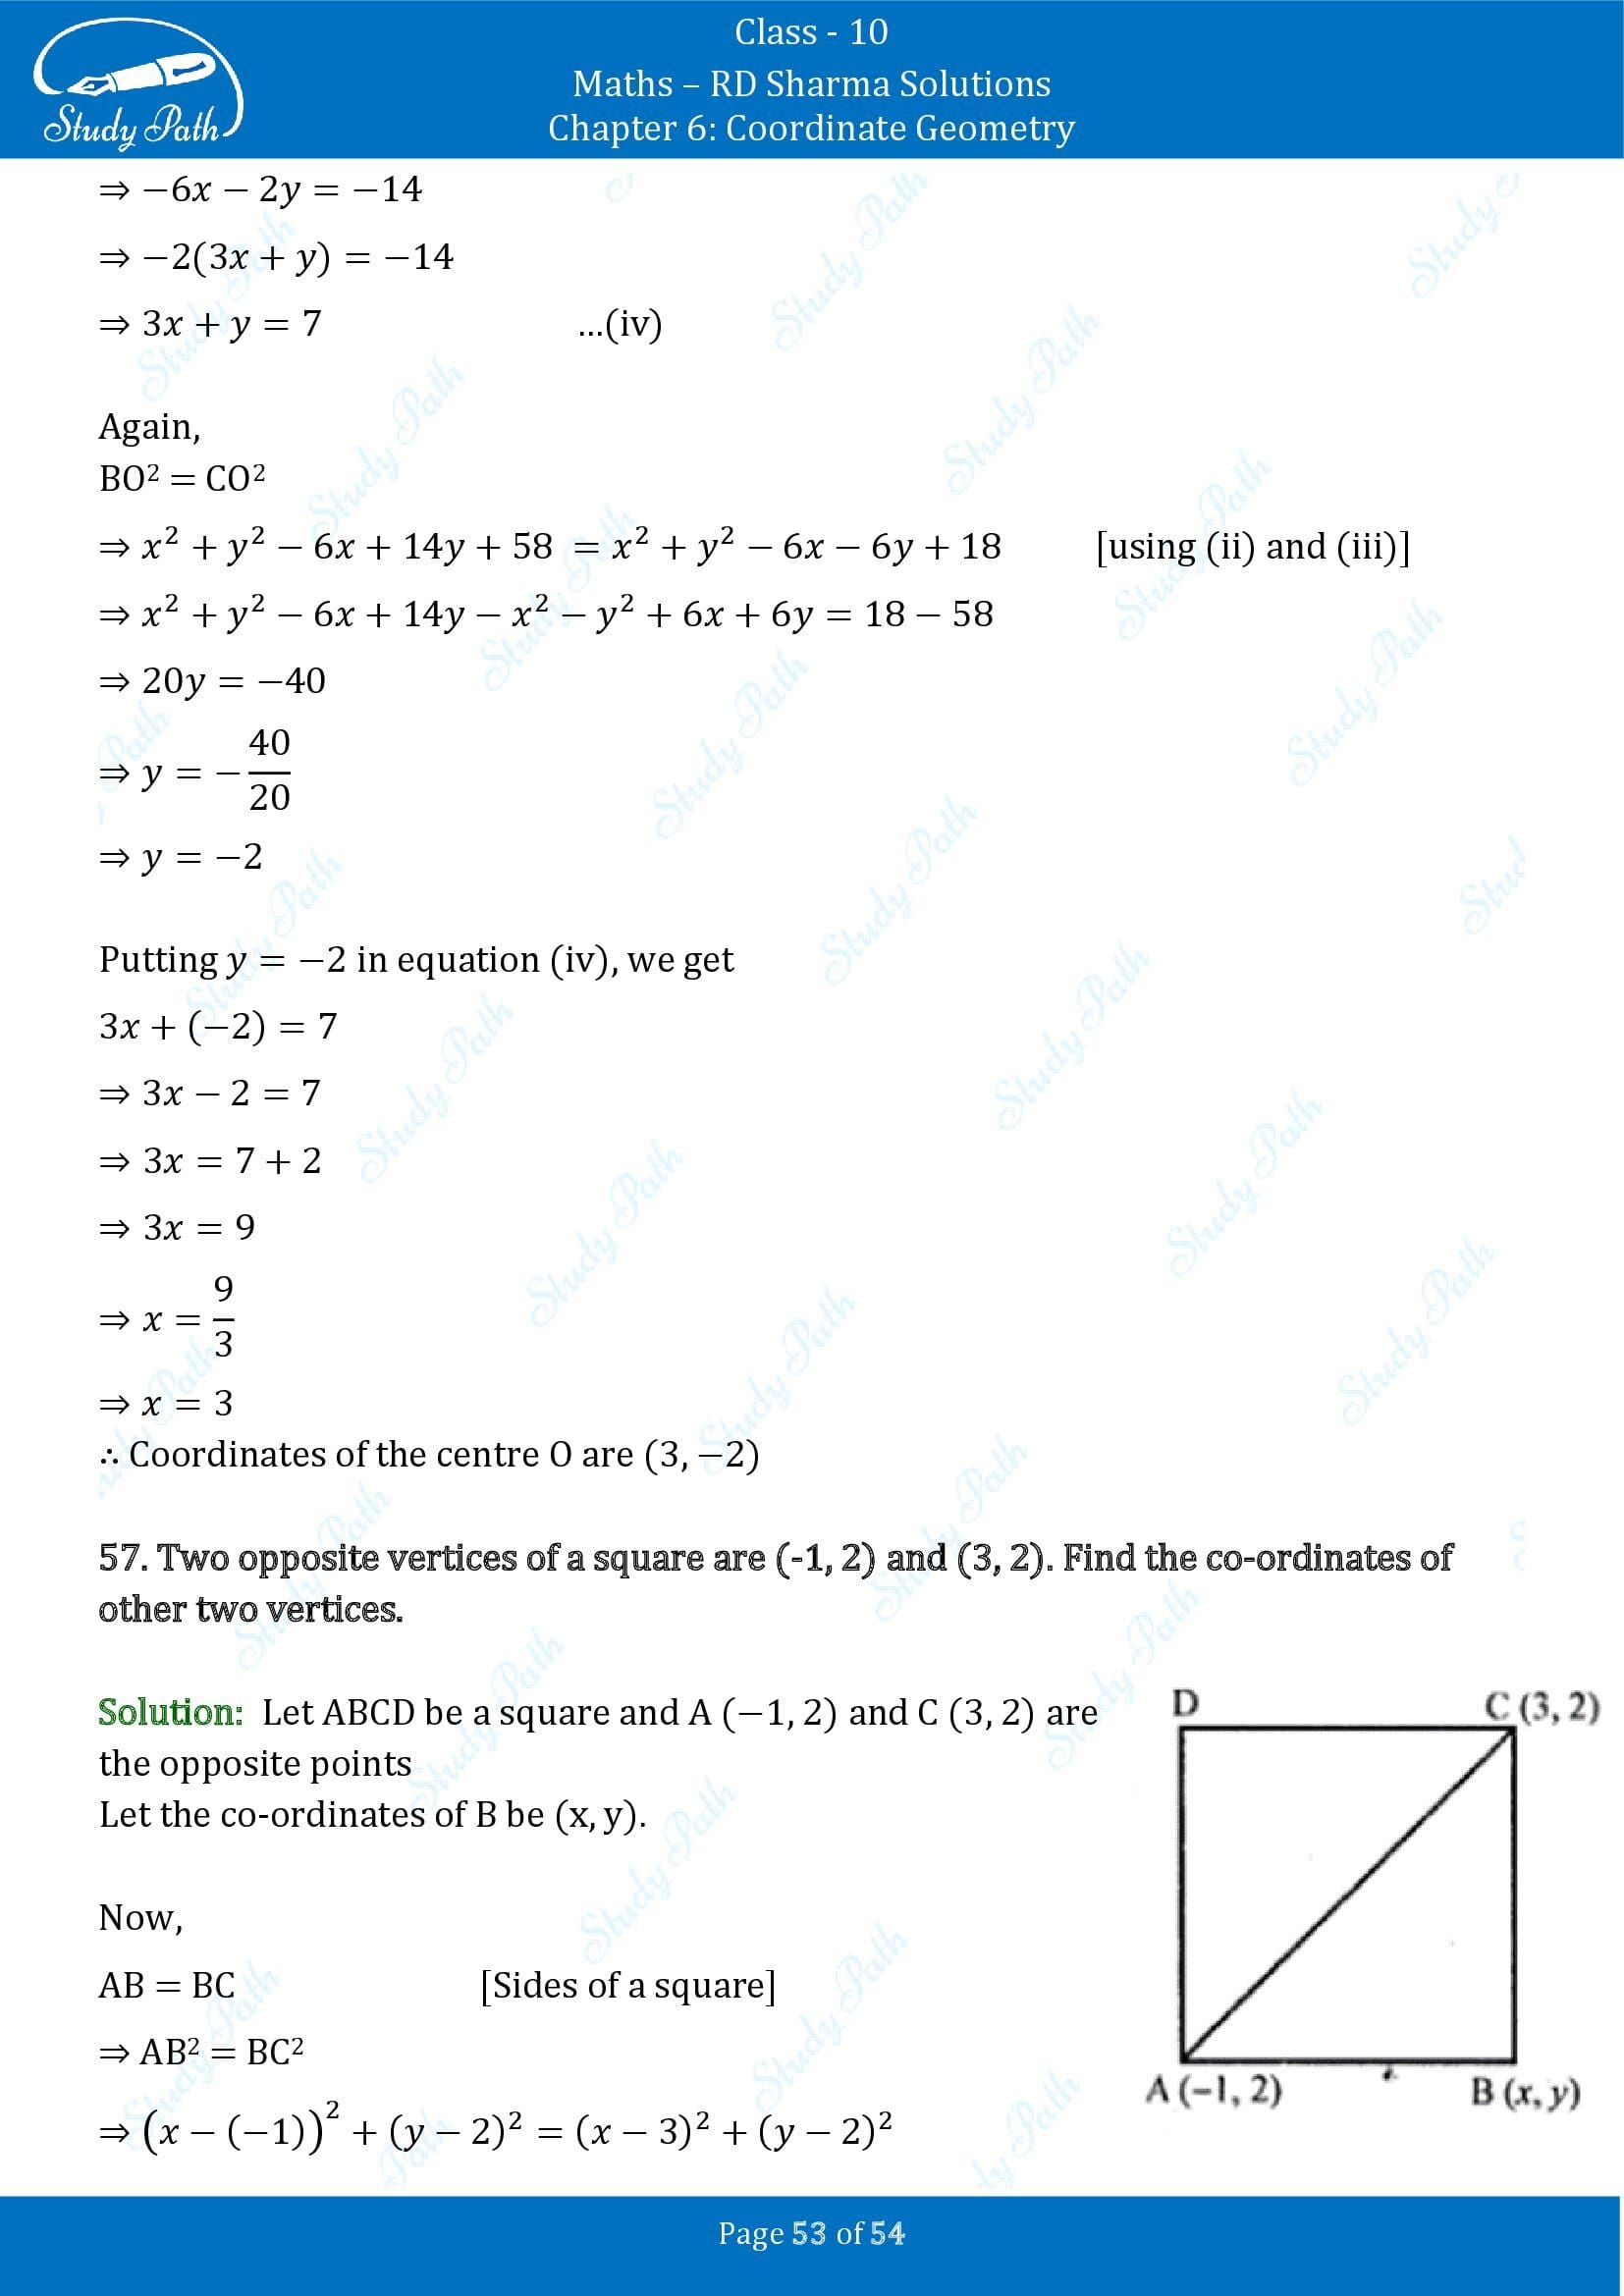 RD Sharma Solutions Class 10 Chapter 6 Coordinate Geometry Exercise 6.2 0053